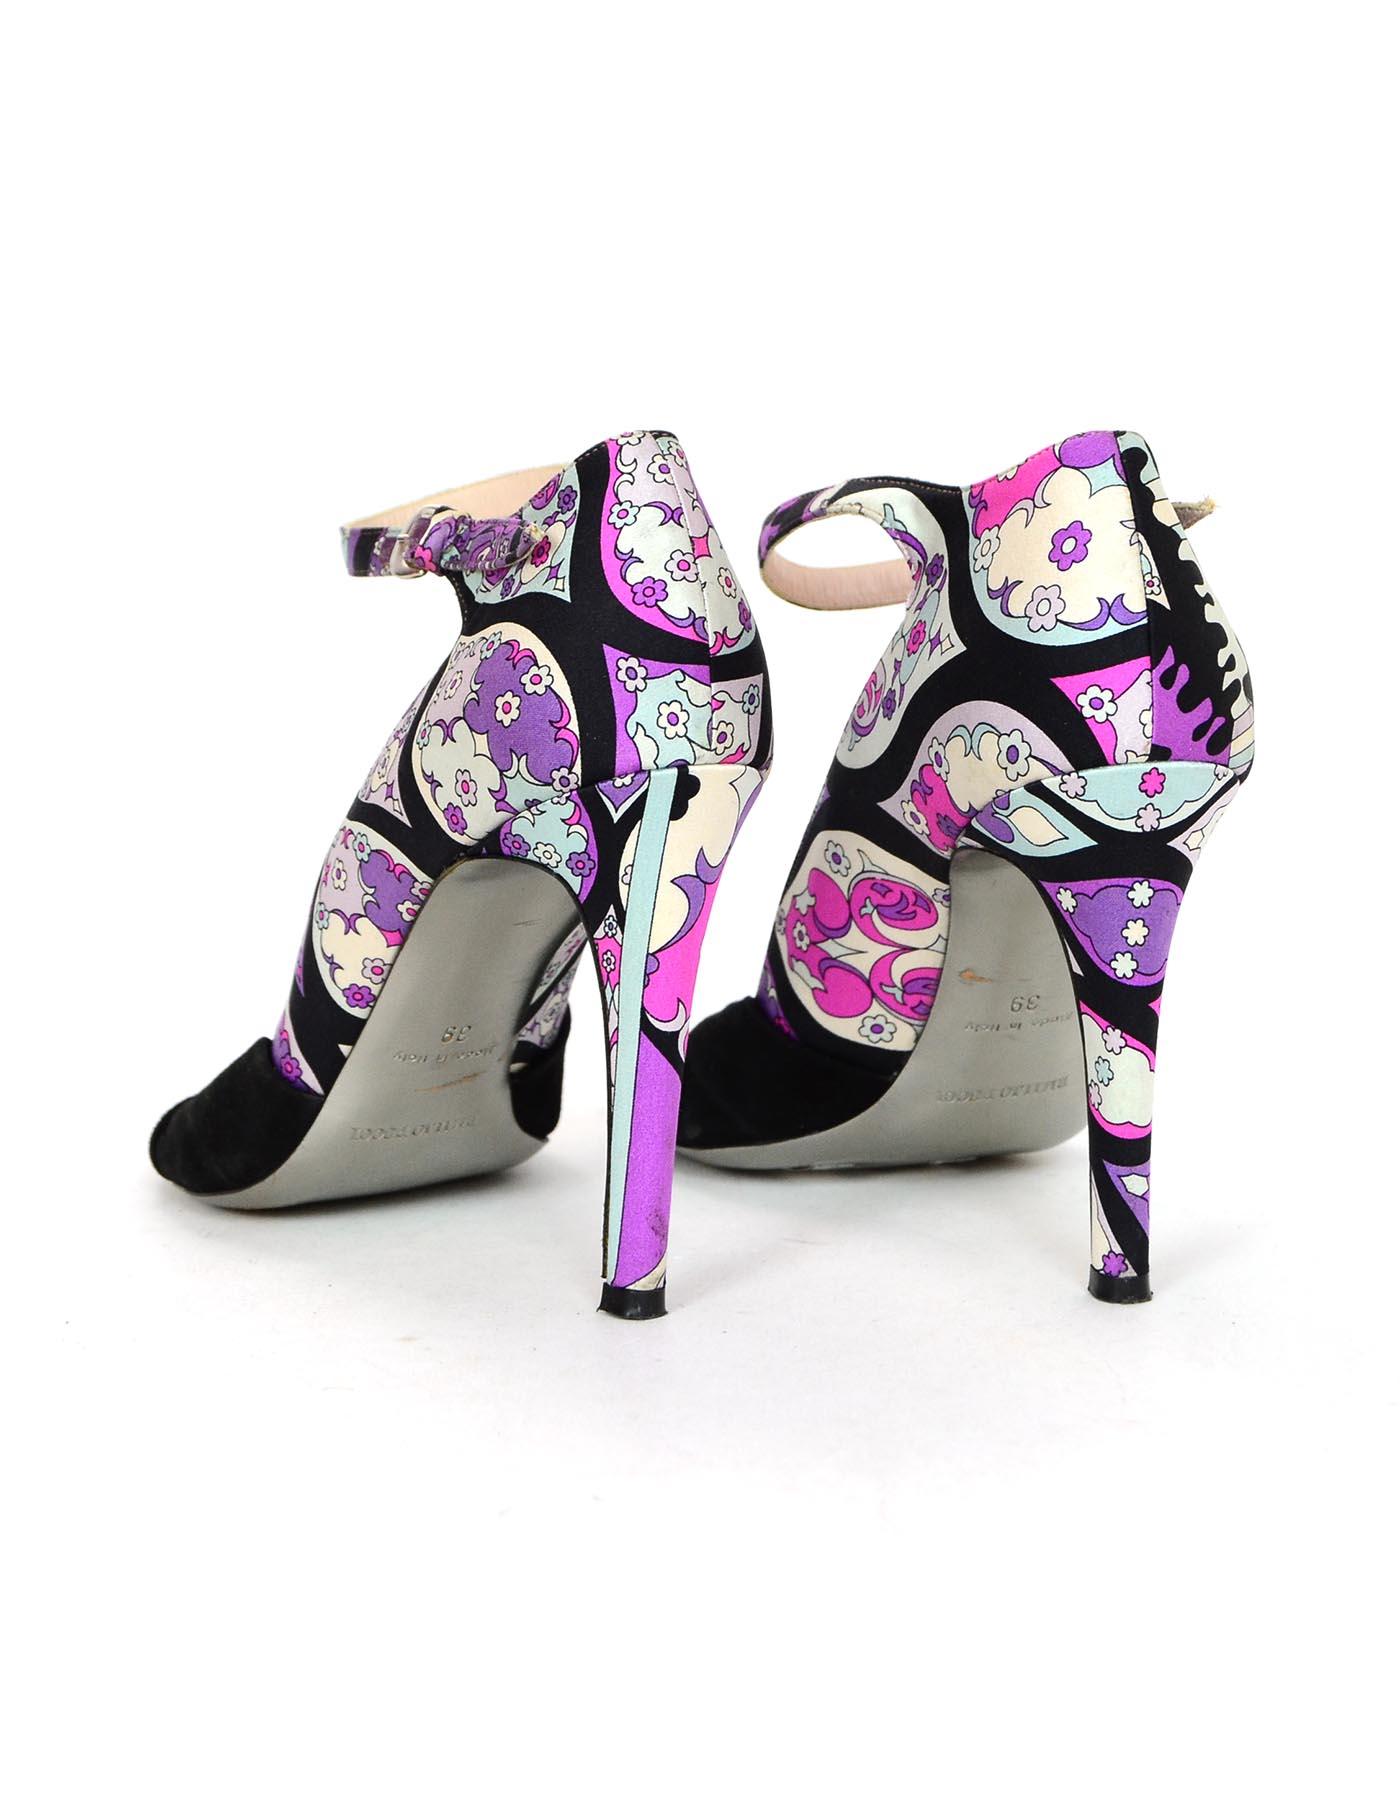 Emilio Pucci Printed Fabric Heels Shoes W/ Black Suede Sz 39 In Excellent Condition In New York, NY